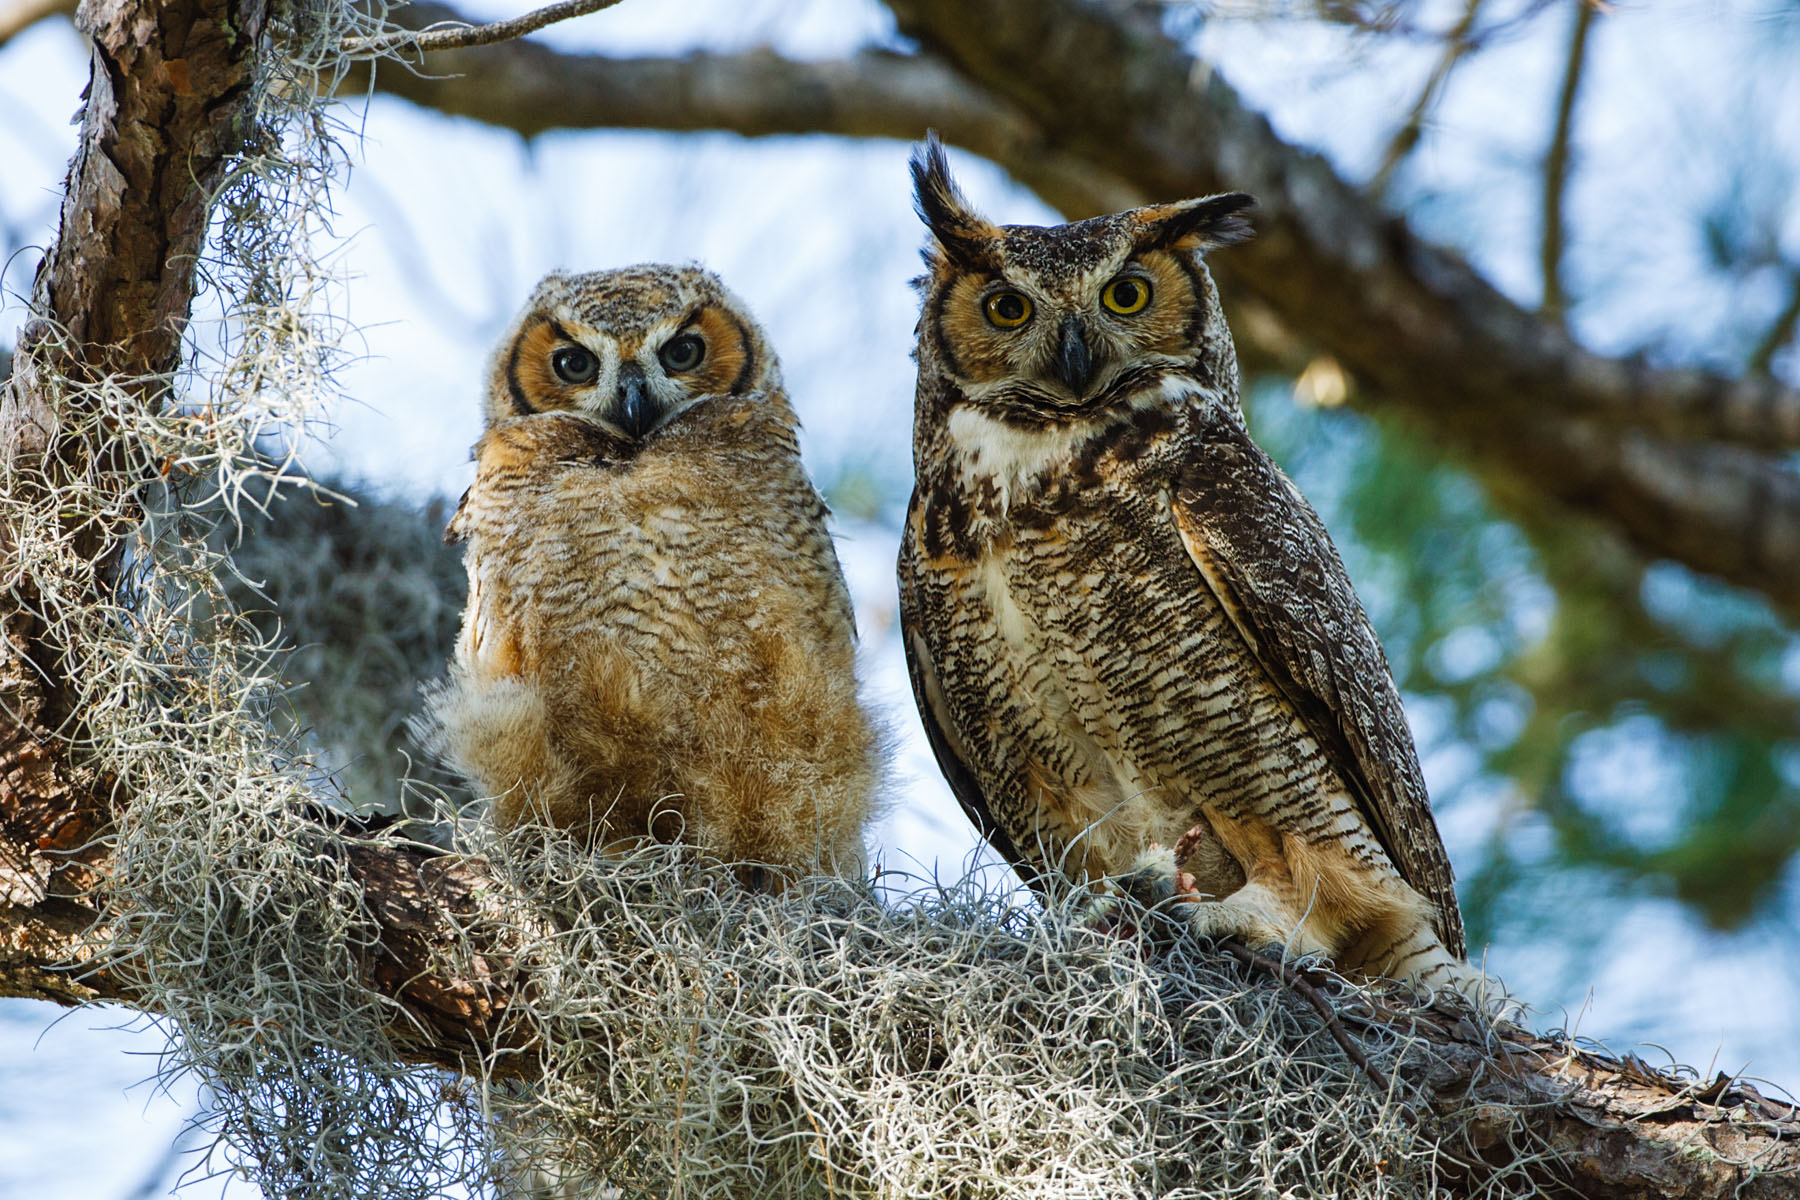 Great Horned Owl fledgling and mother, Honeymoon Island State Park, Florida.  This image available for licensing.  Click for next photo.